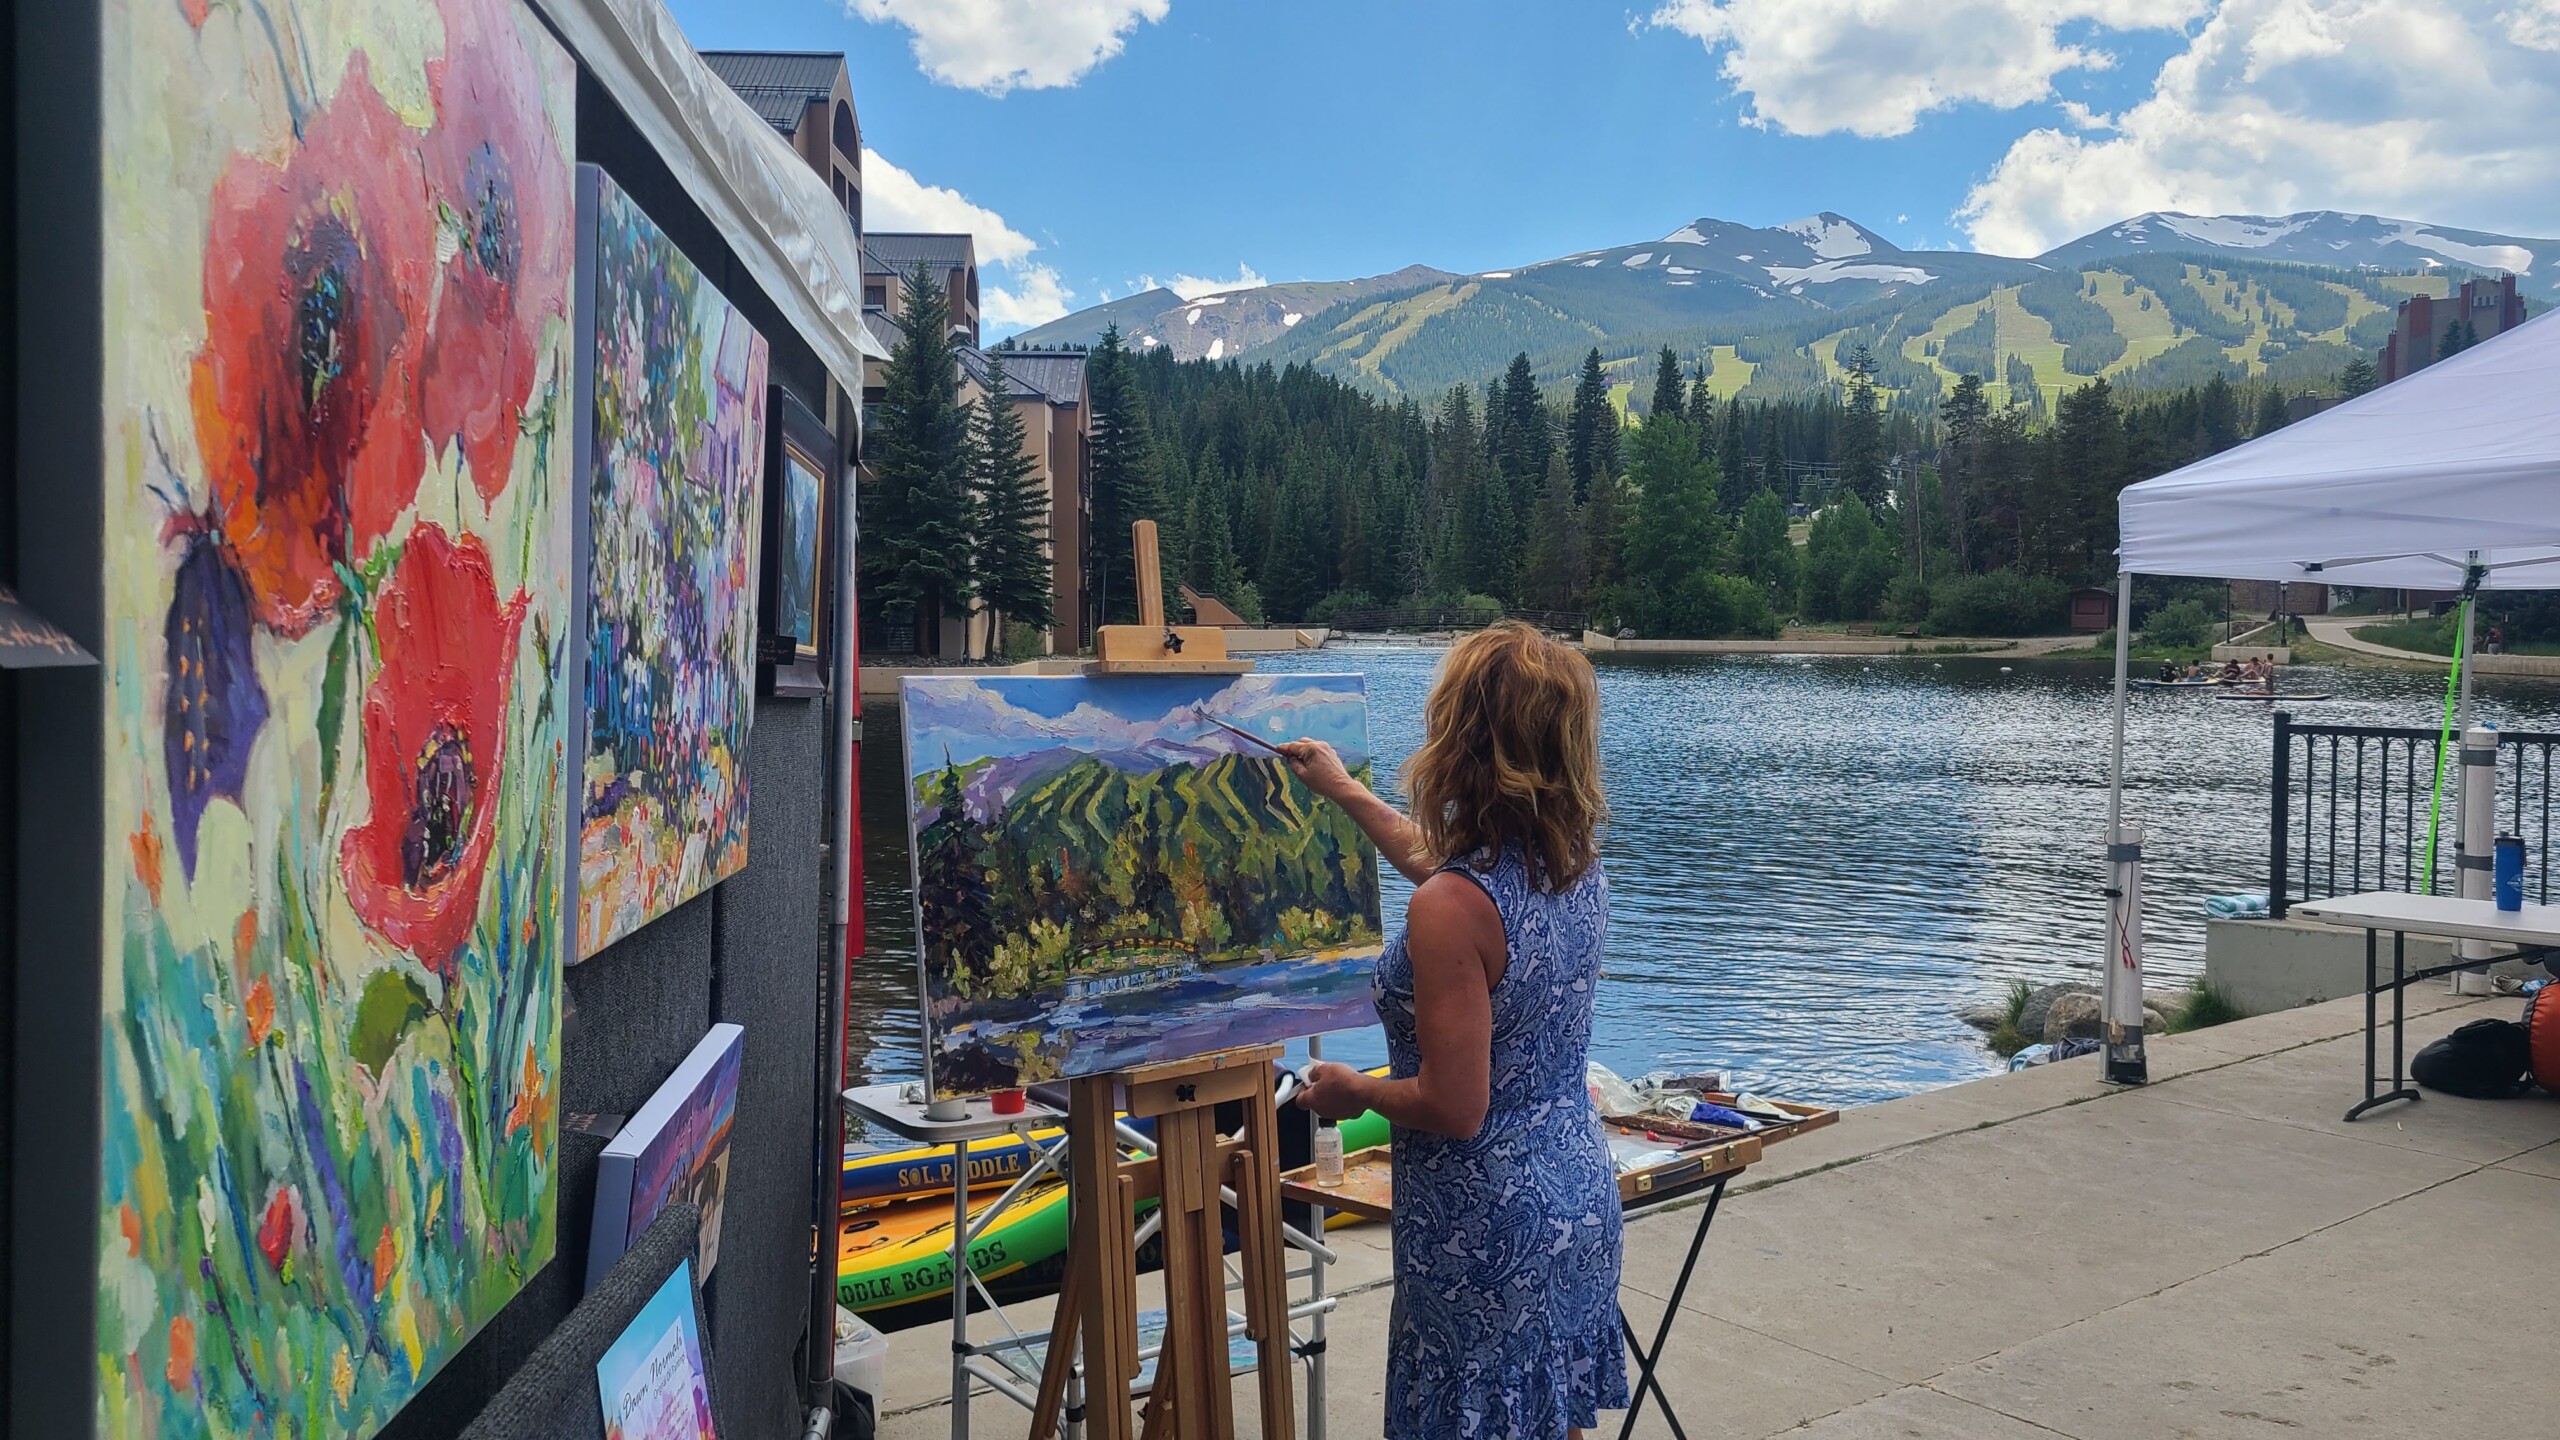 Plan to Attend the 22nd Annual Breckenridge Art Festival Mountain Living